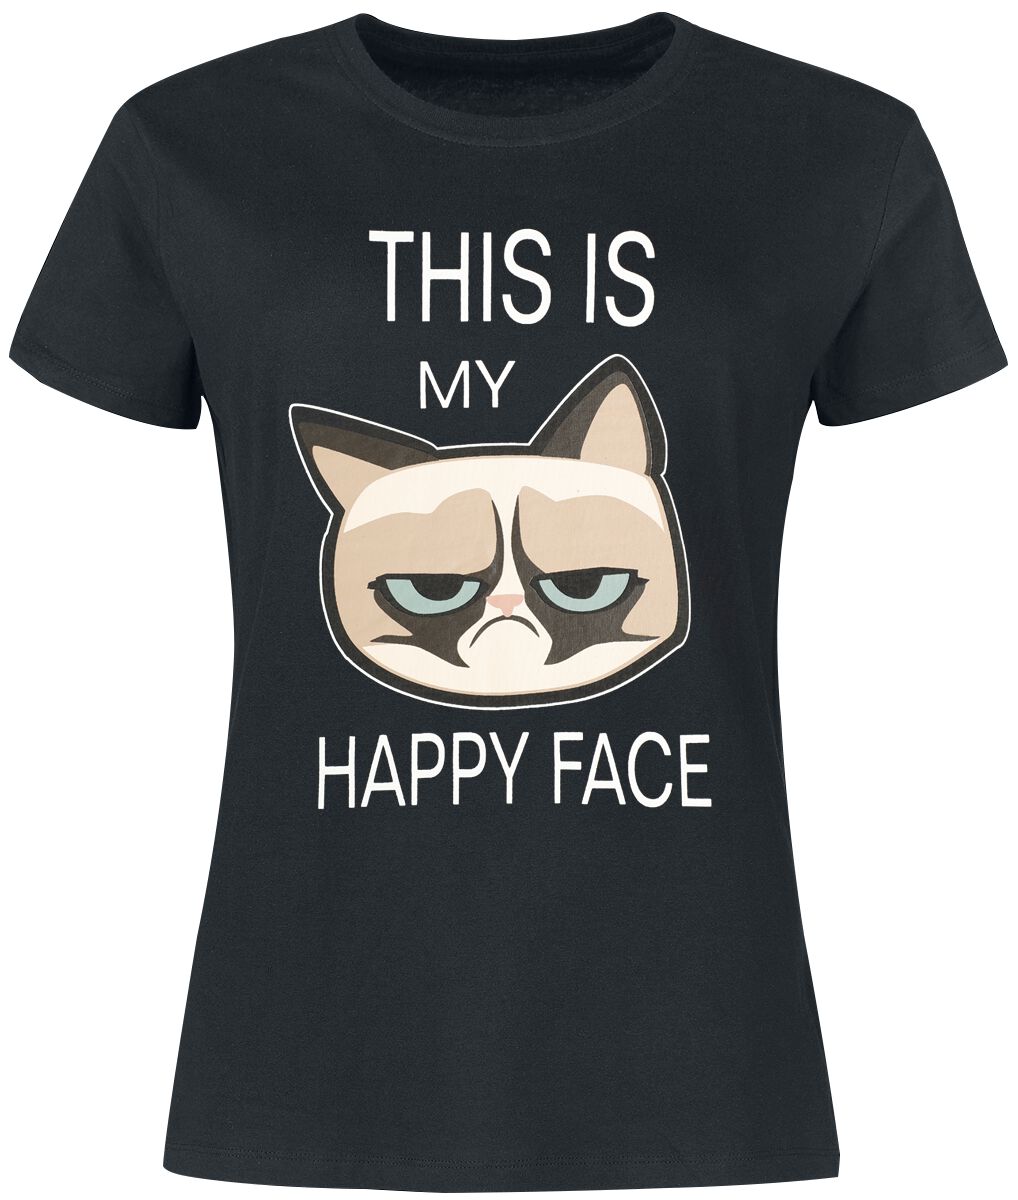 Grumpy Cat This Is My Happy Face T-Shirt schwarz in M